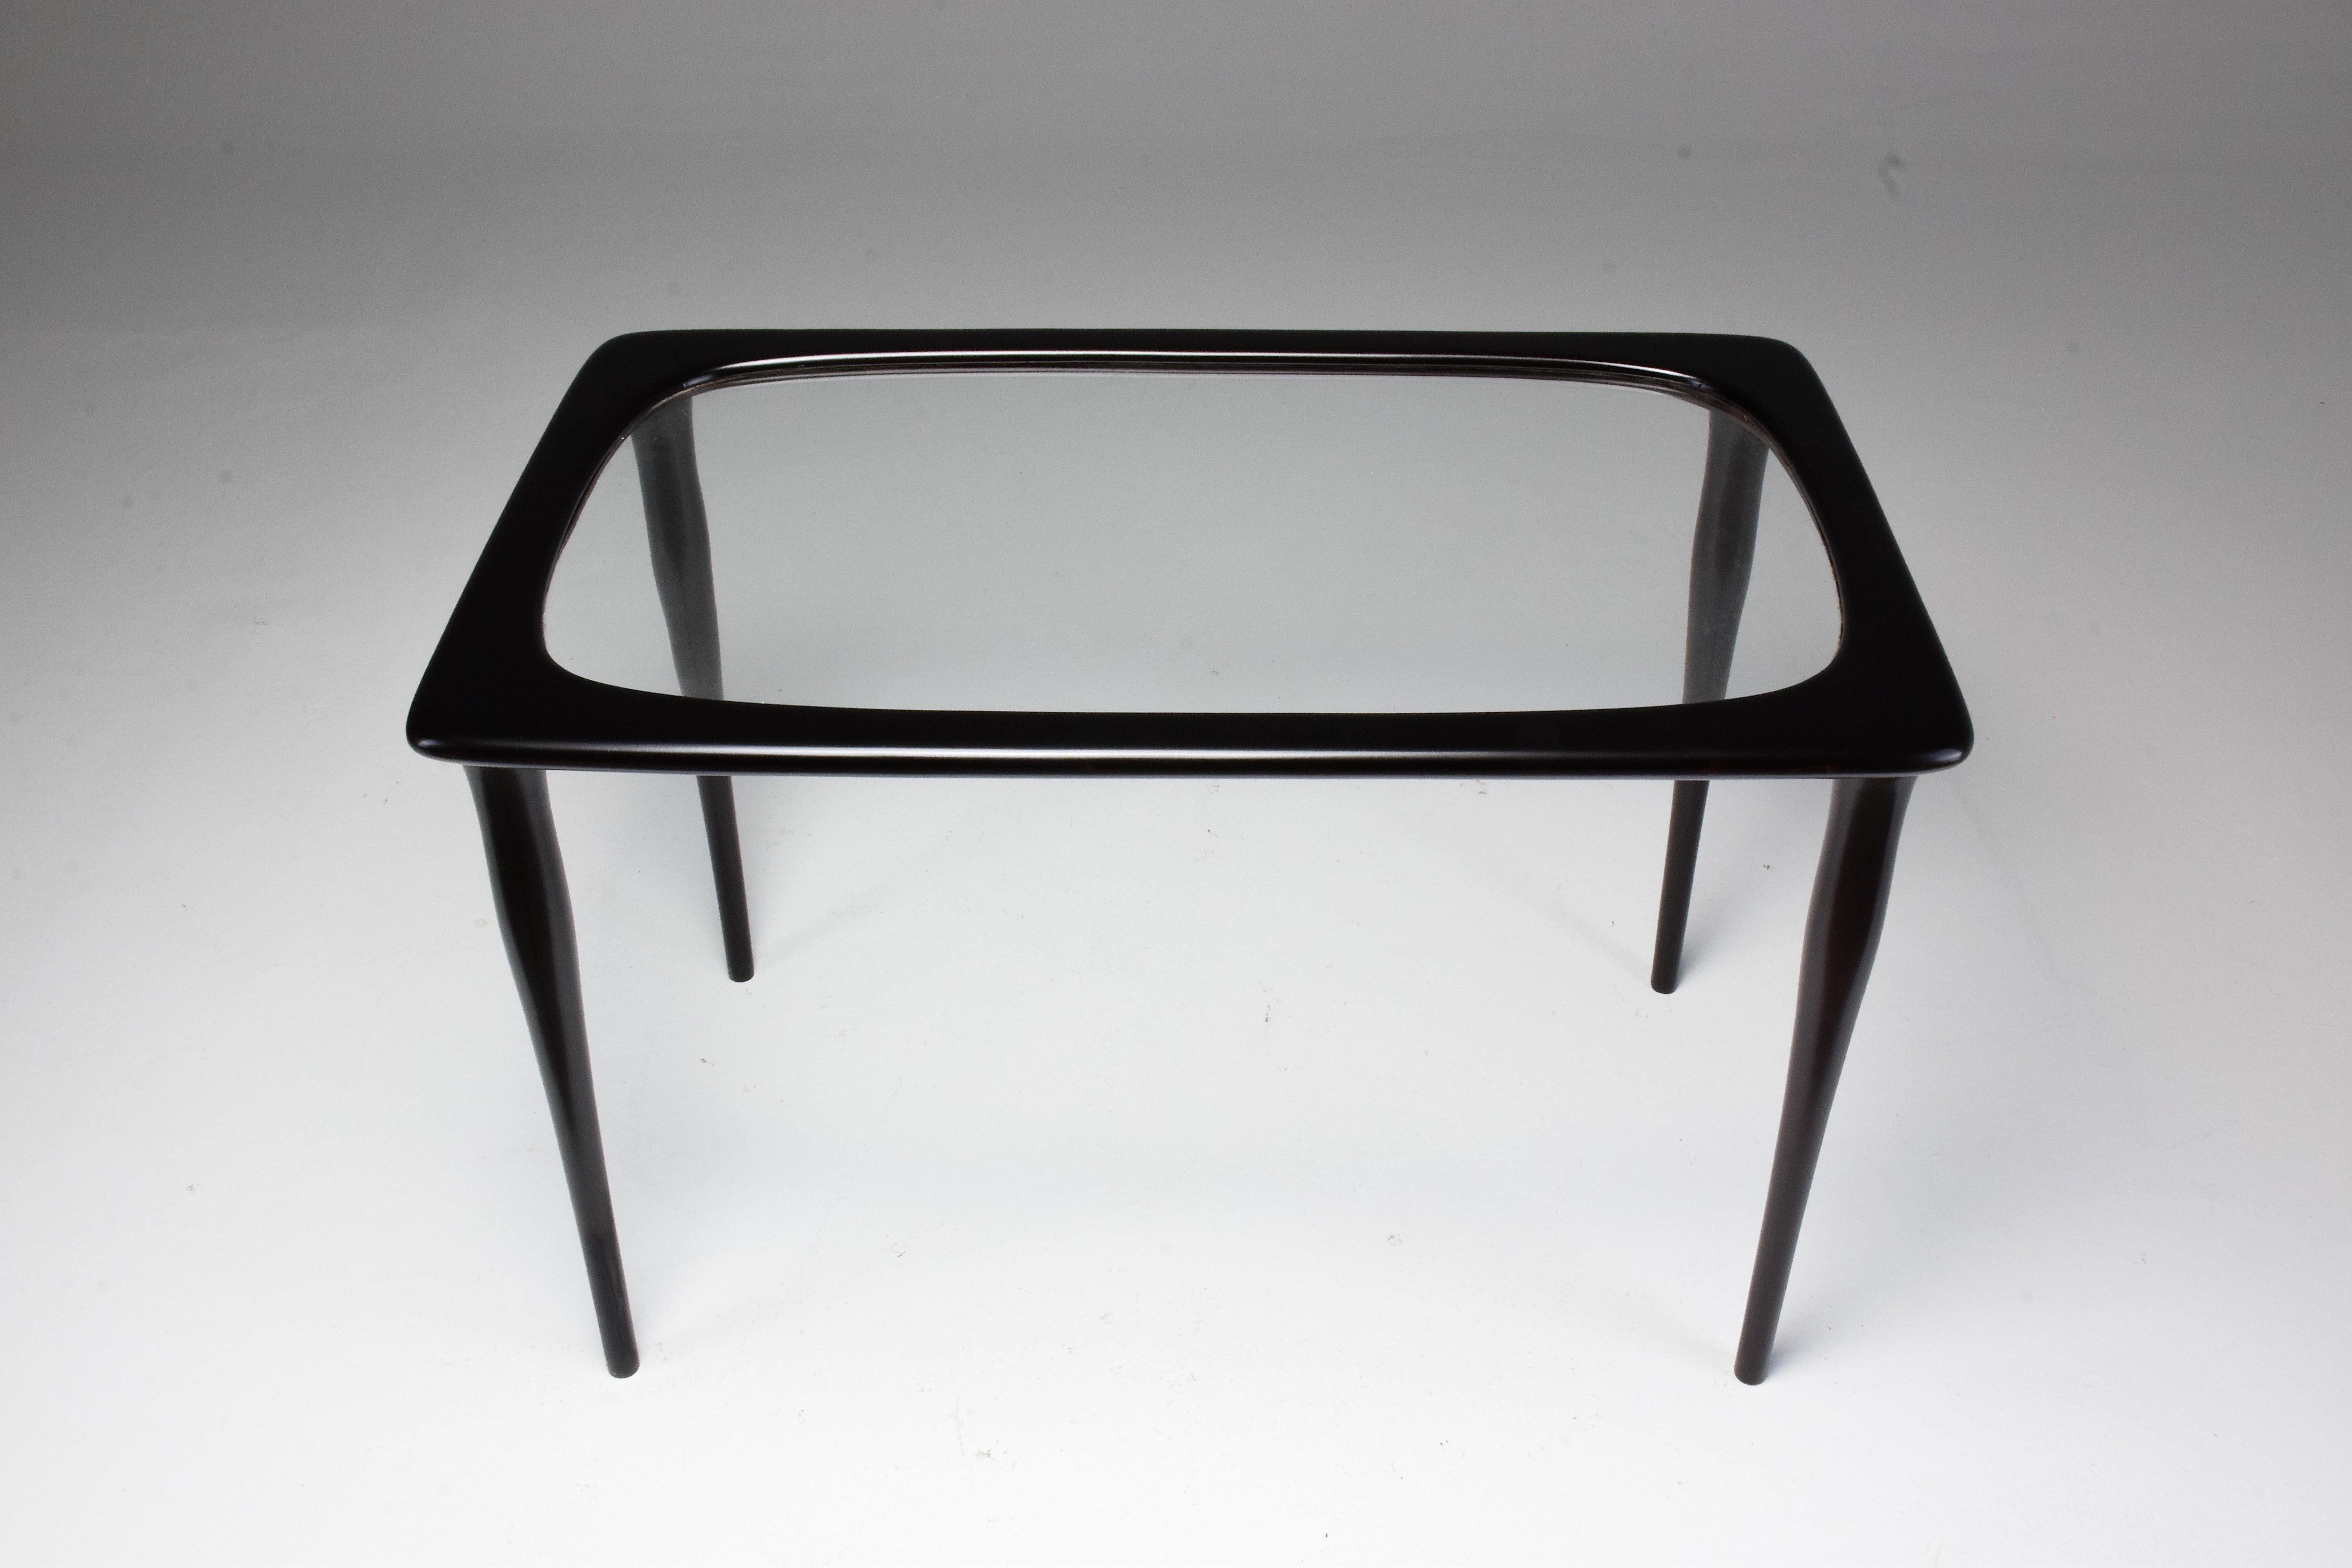 Three Italian Midcentury Nesting Tables by Ico Parisi, 1950s For Sale 5